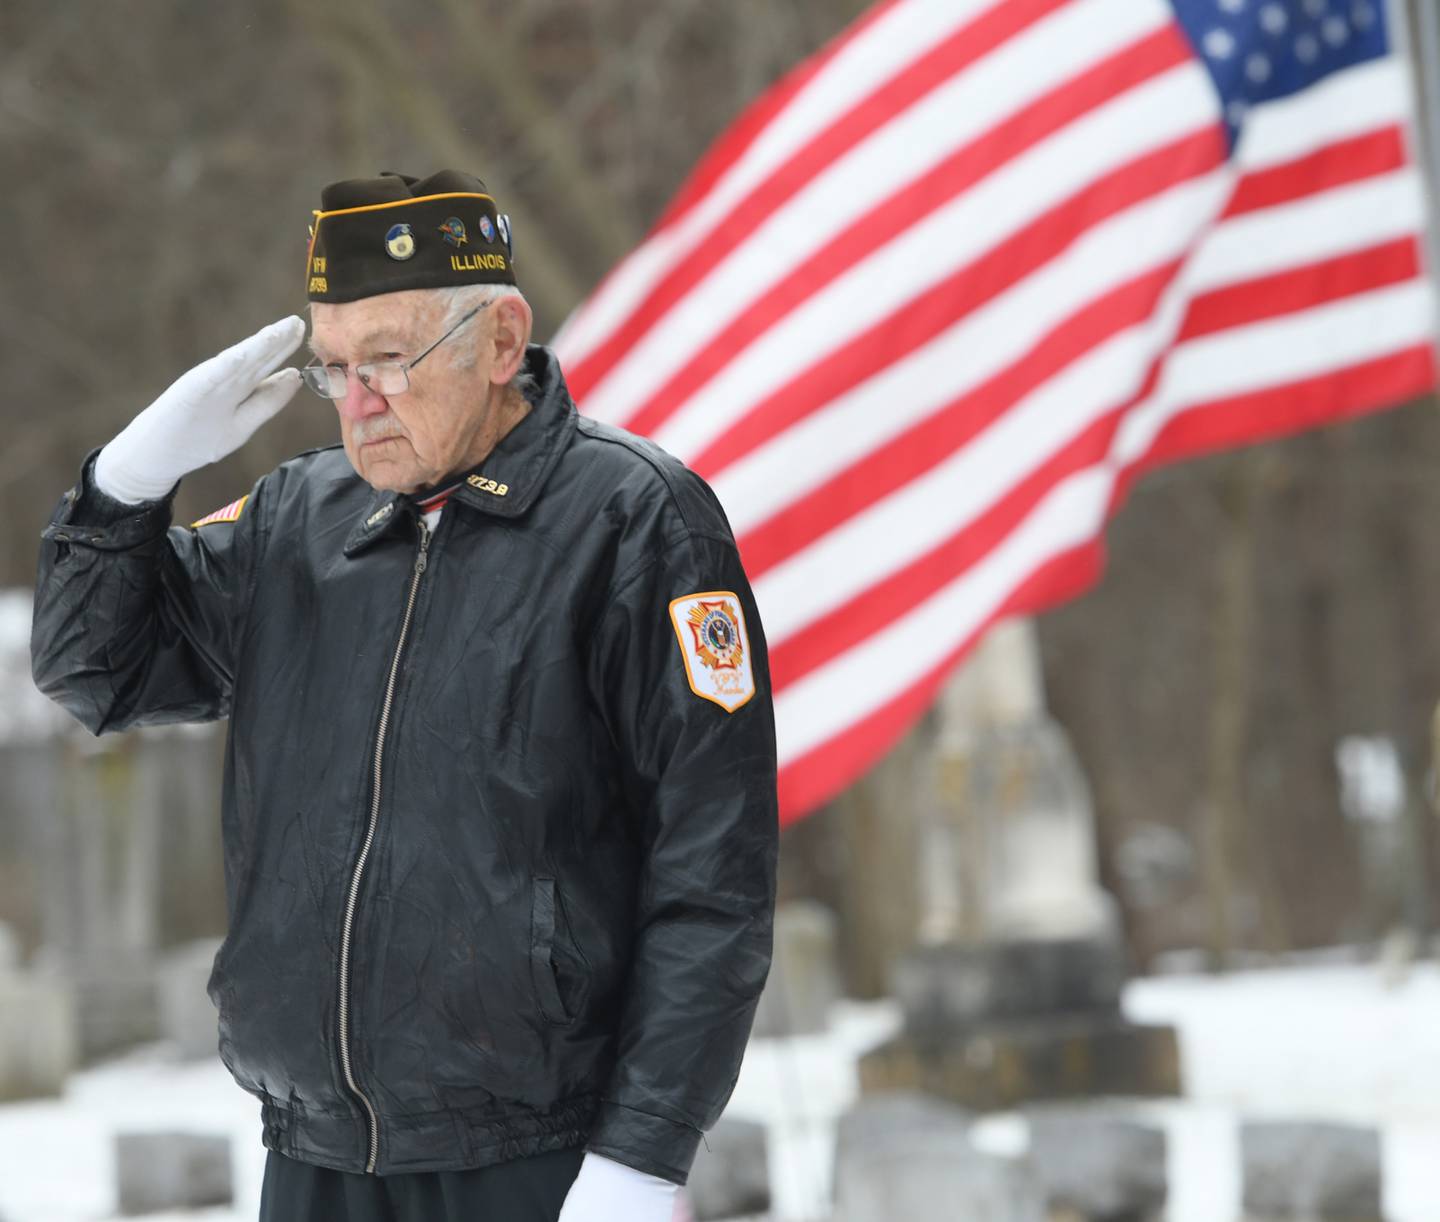 Stan Eden of Oregon, a Korean war veteran, salutes after laying a wreath in honor of the Merchant Marines, at Daysville Cemetery on Dec. 17 during the Wreaths Across America project.